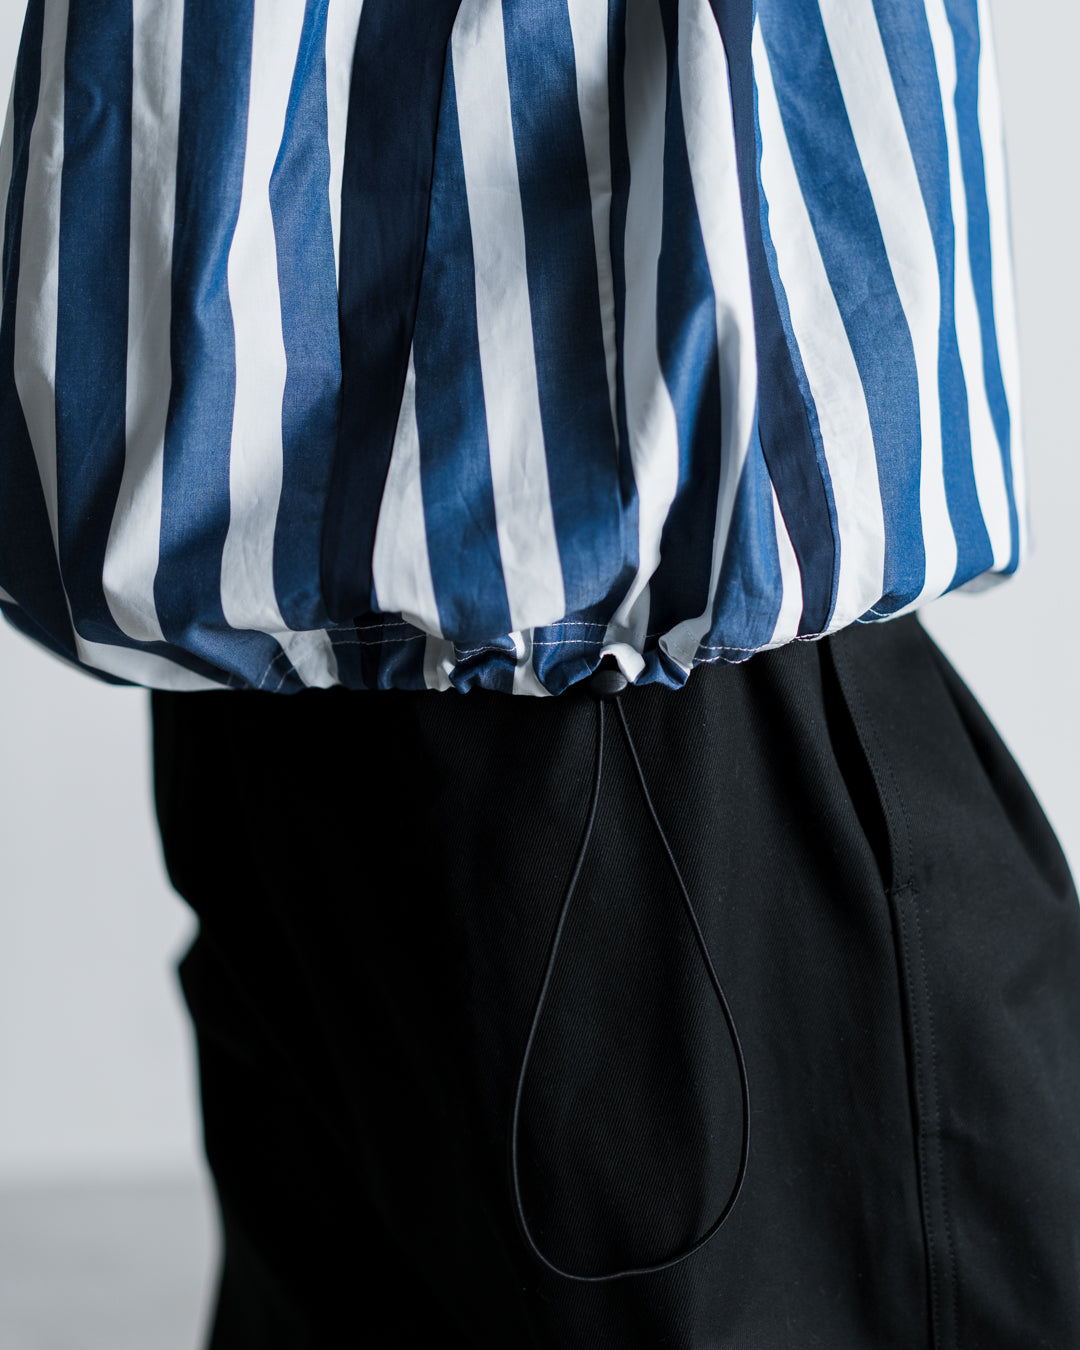 UNTRACE STRIPE FOOTBALL GAME SHIRT S/S